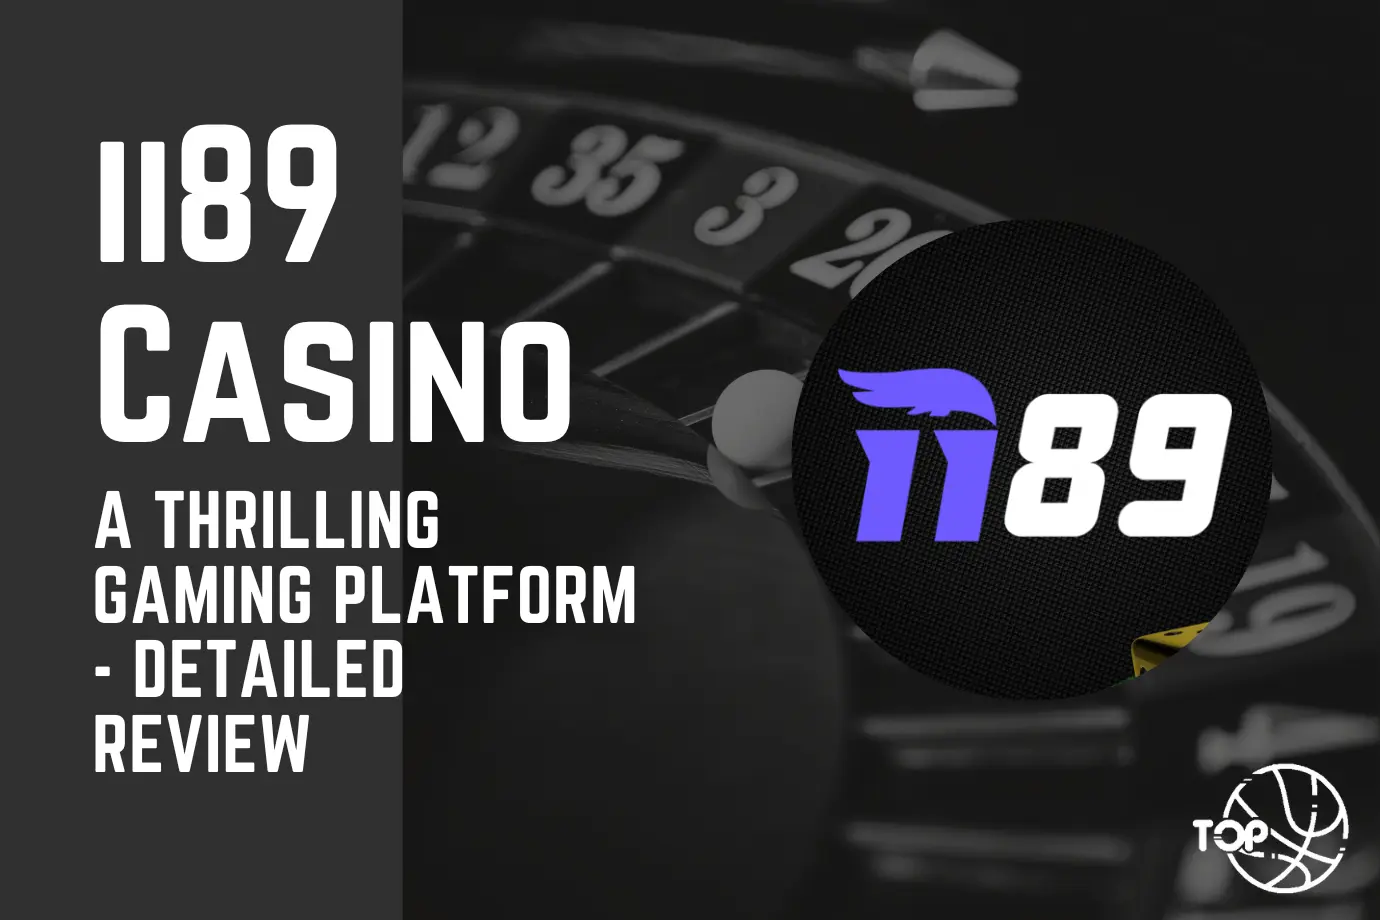 II89 Casino: A Thrilling Gaming Platform - Detailed Review